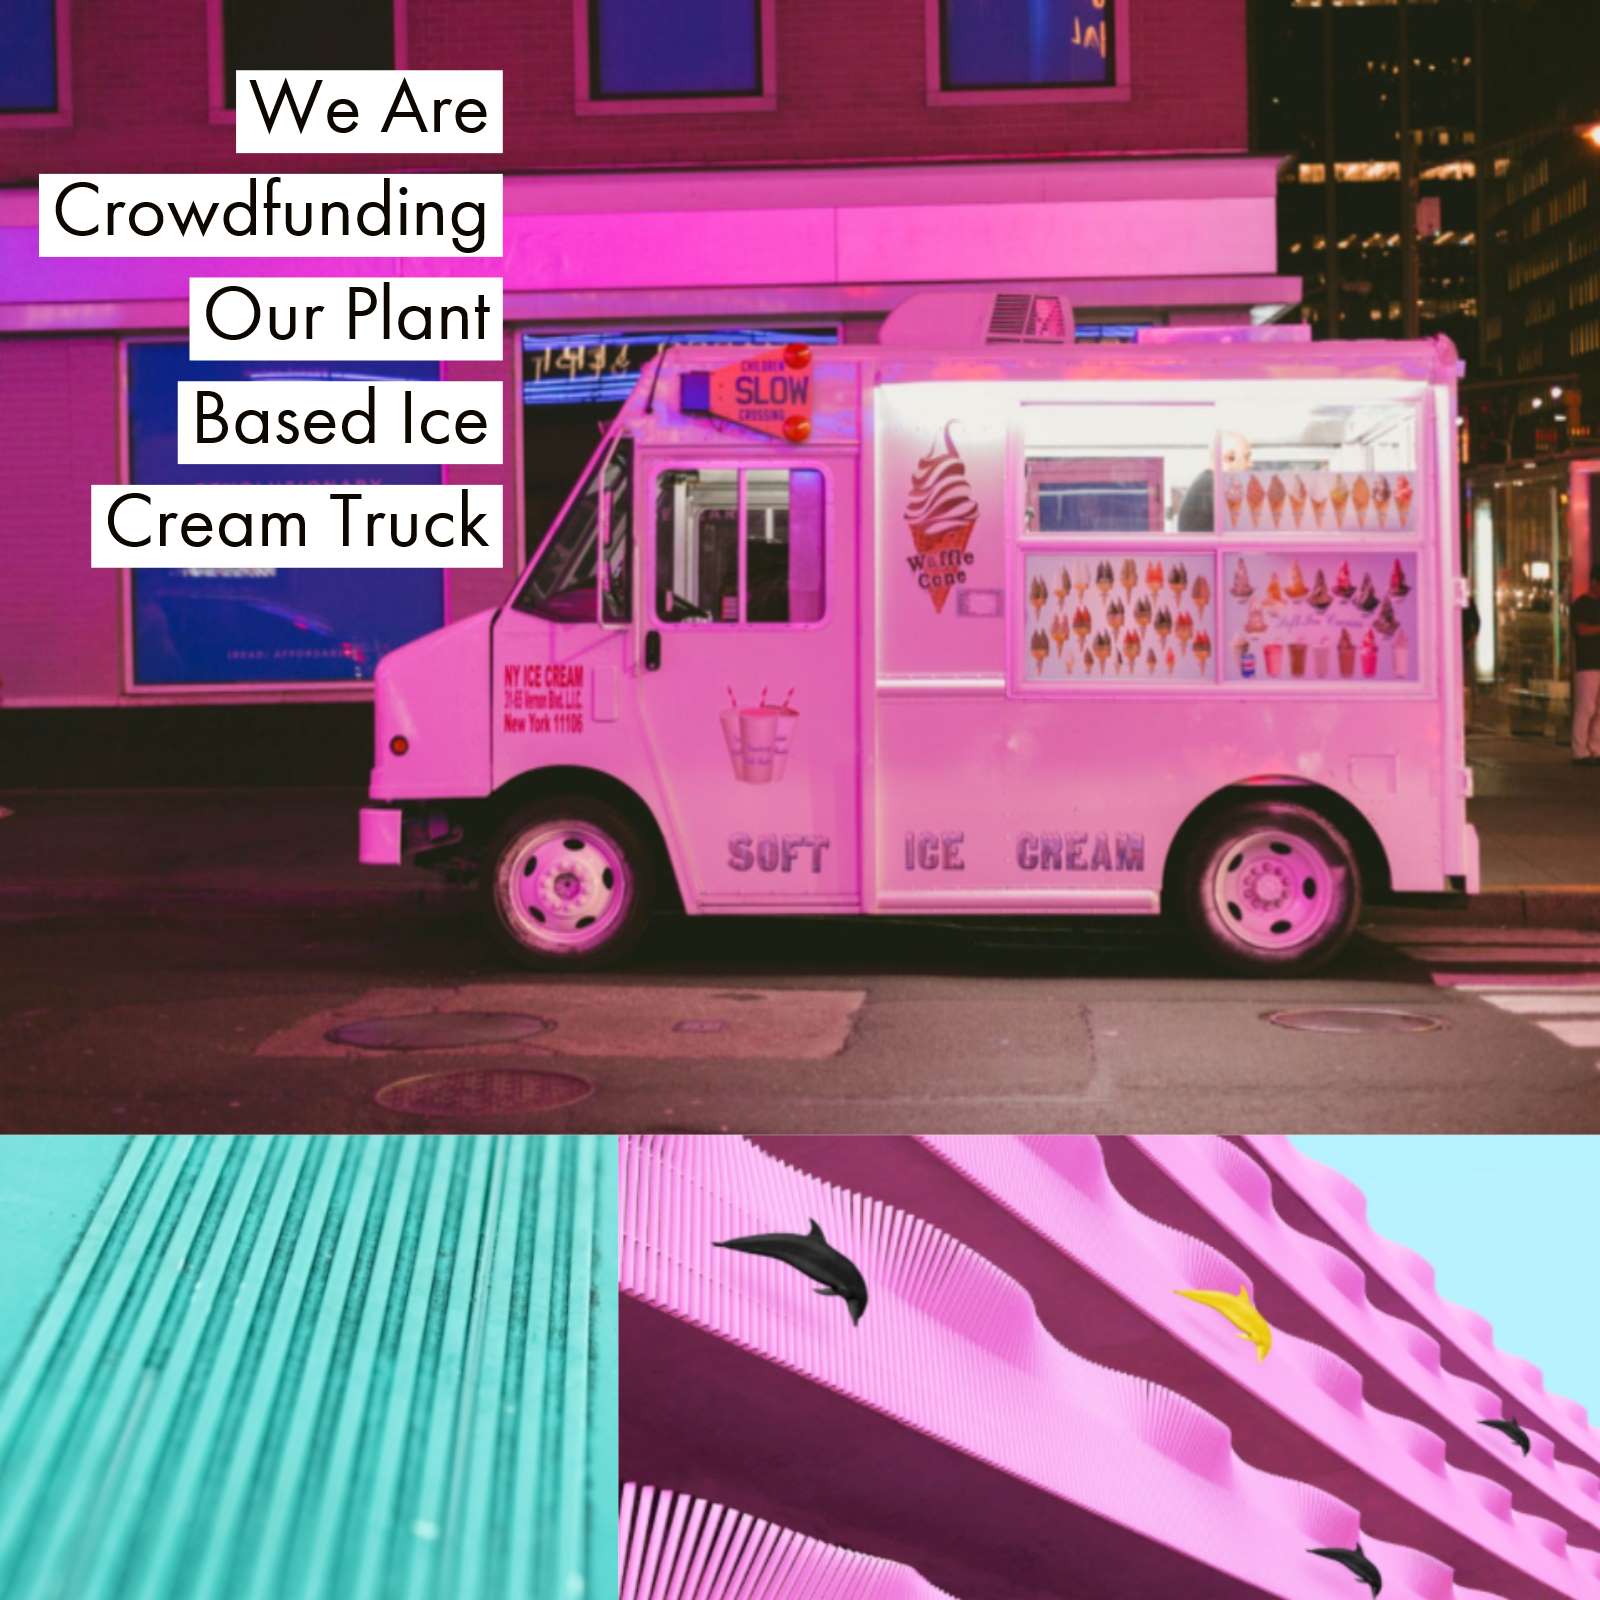 We are crowdfunding our plant based ice cream truck